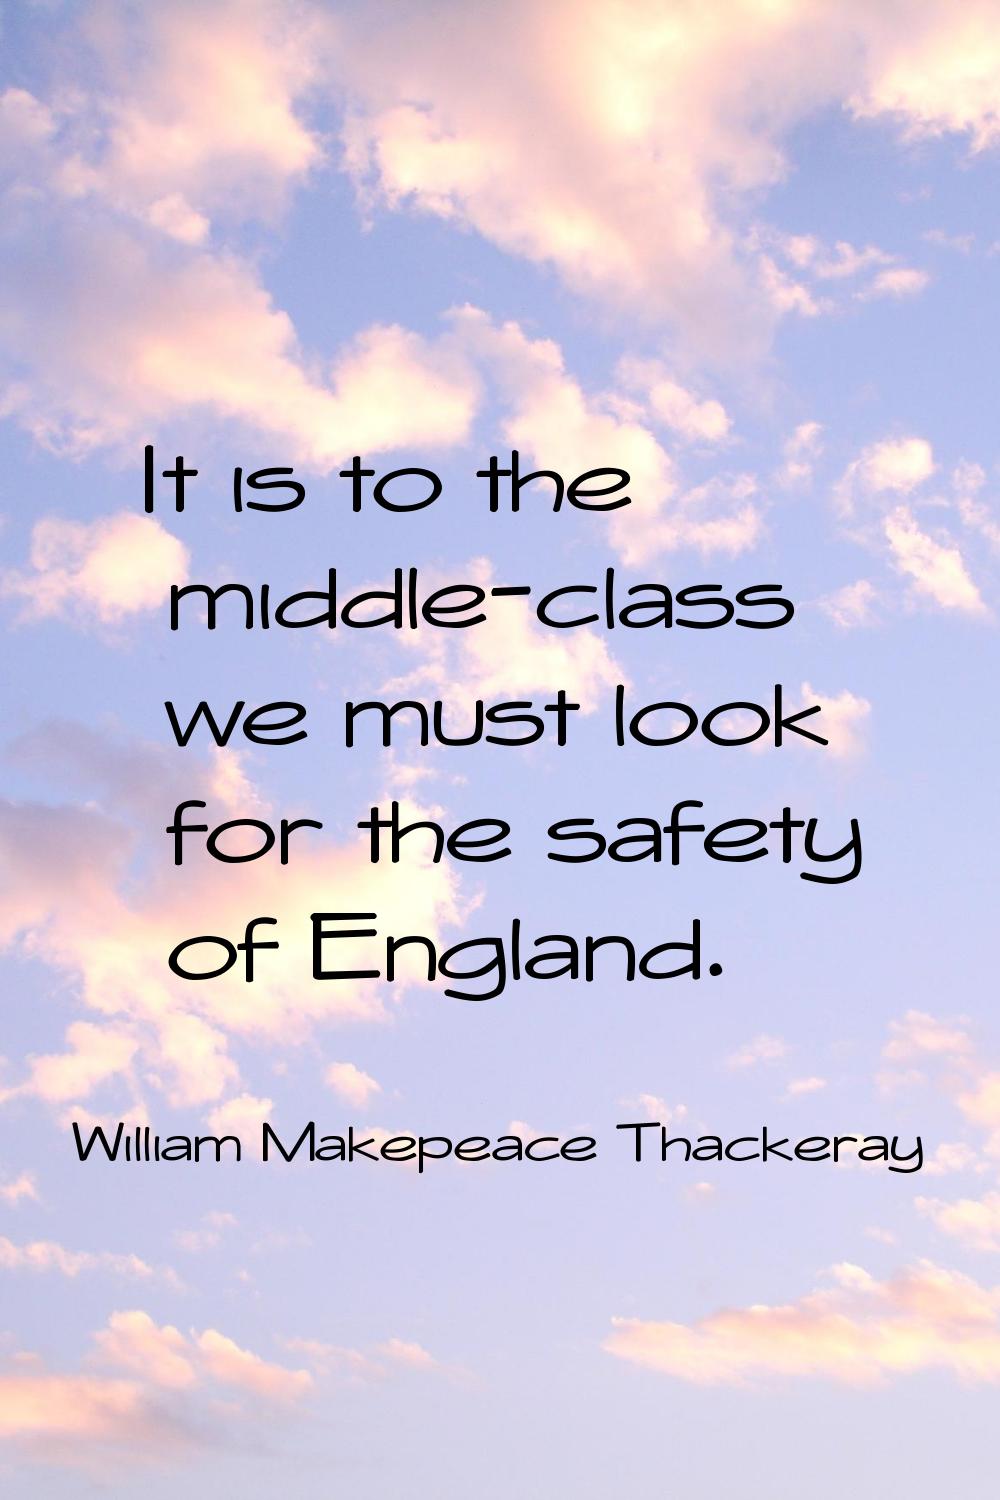 It is to the middle-class we must look for the safety of England.